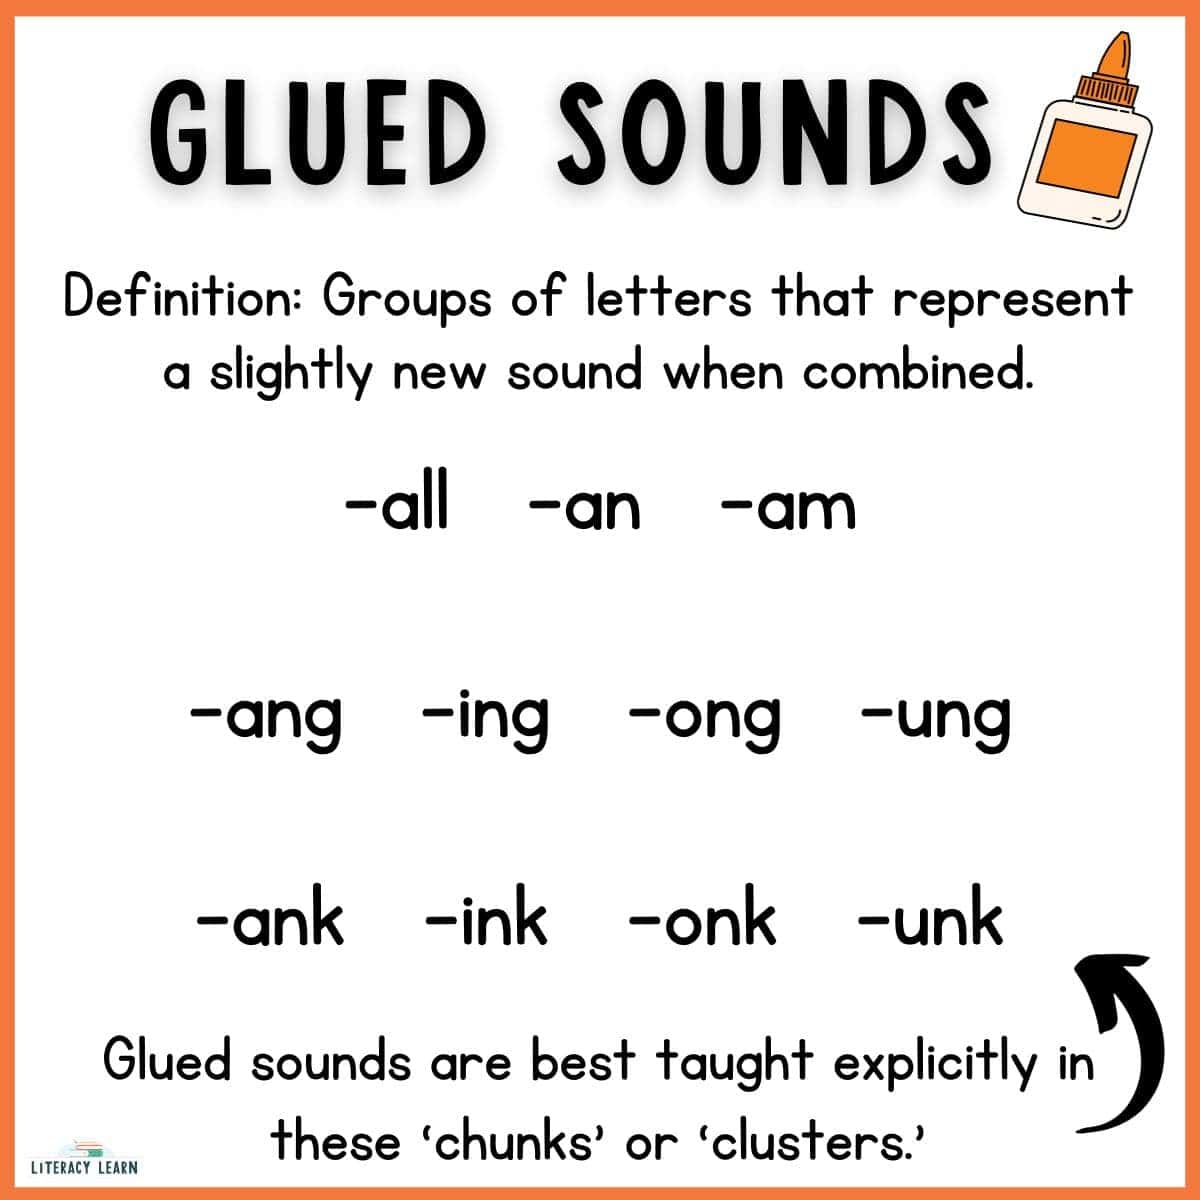 Orange graphic entitled "Glues Sounds" with definition and examples.